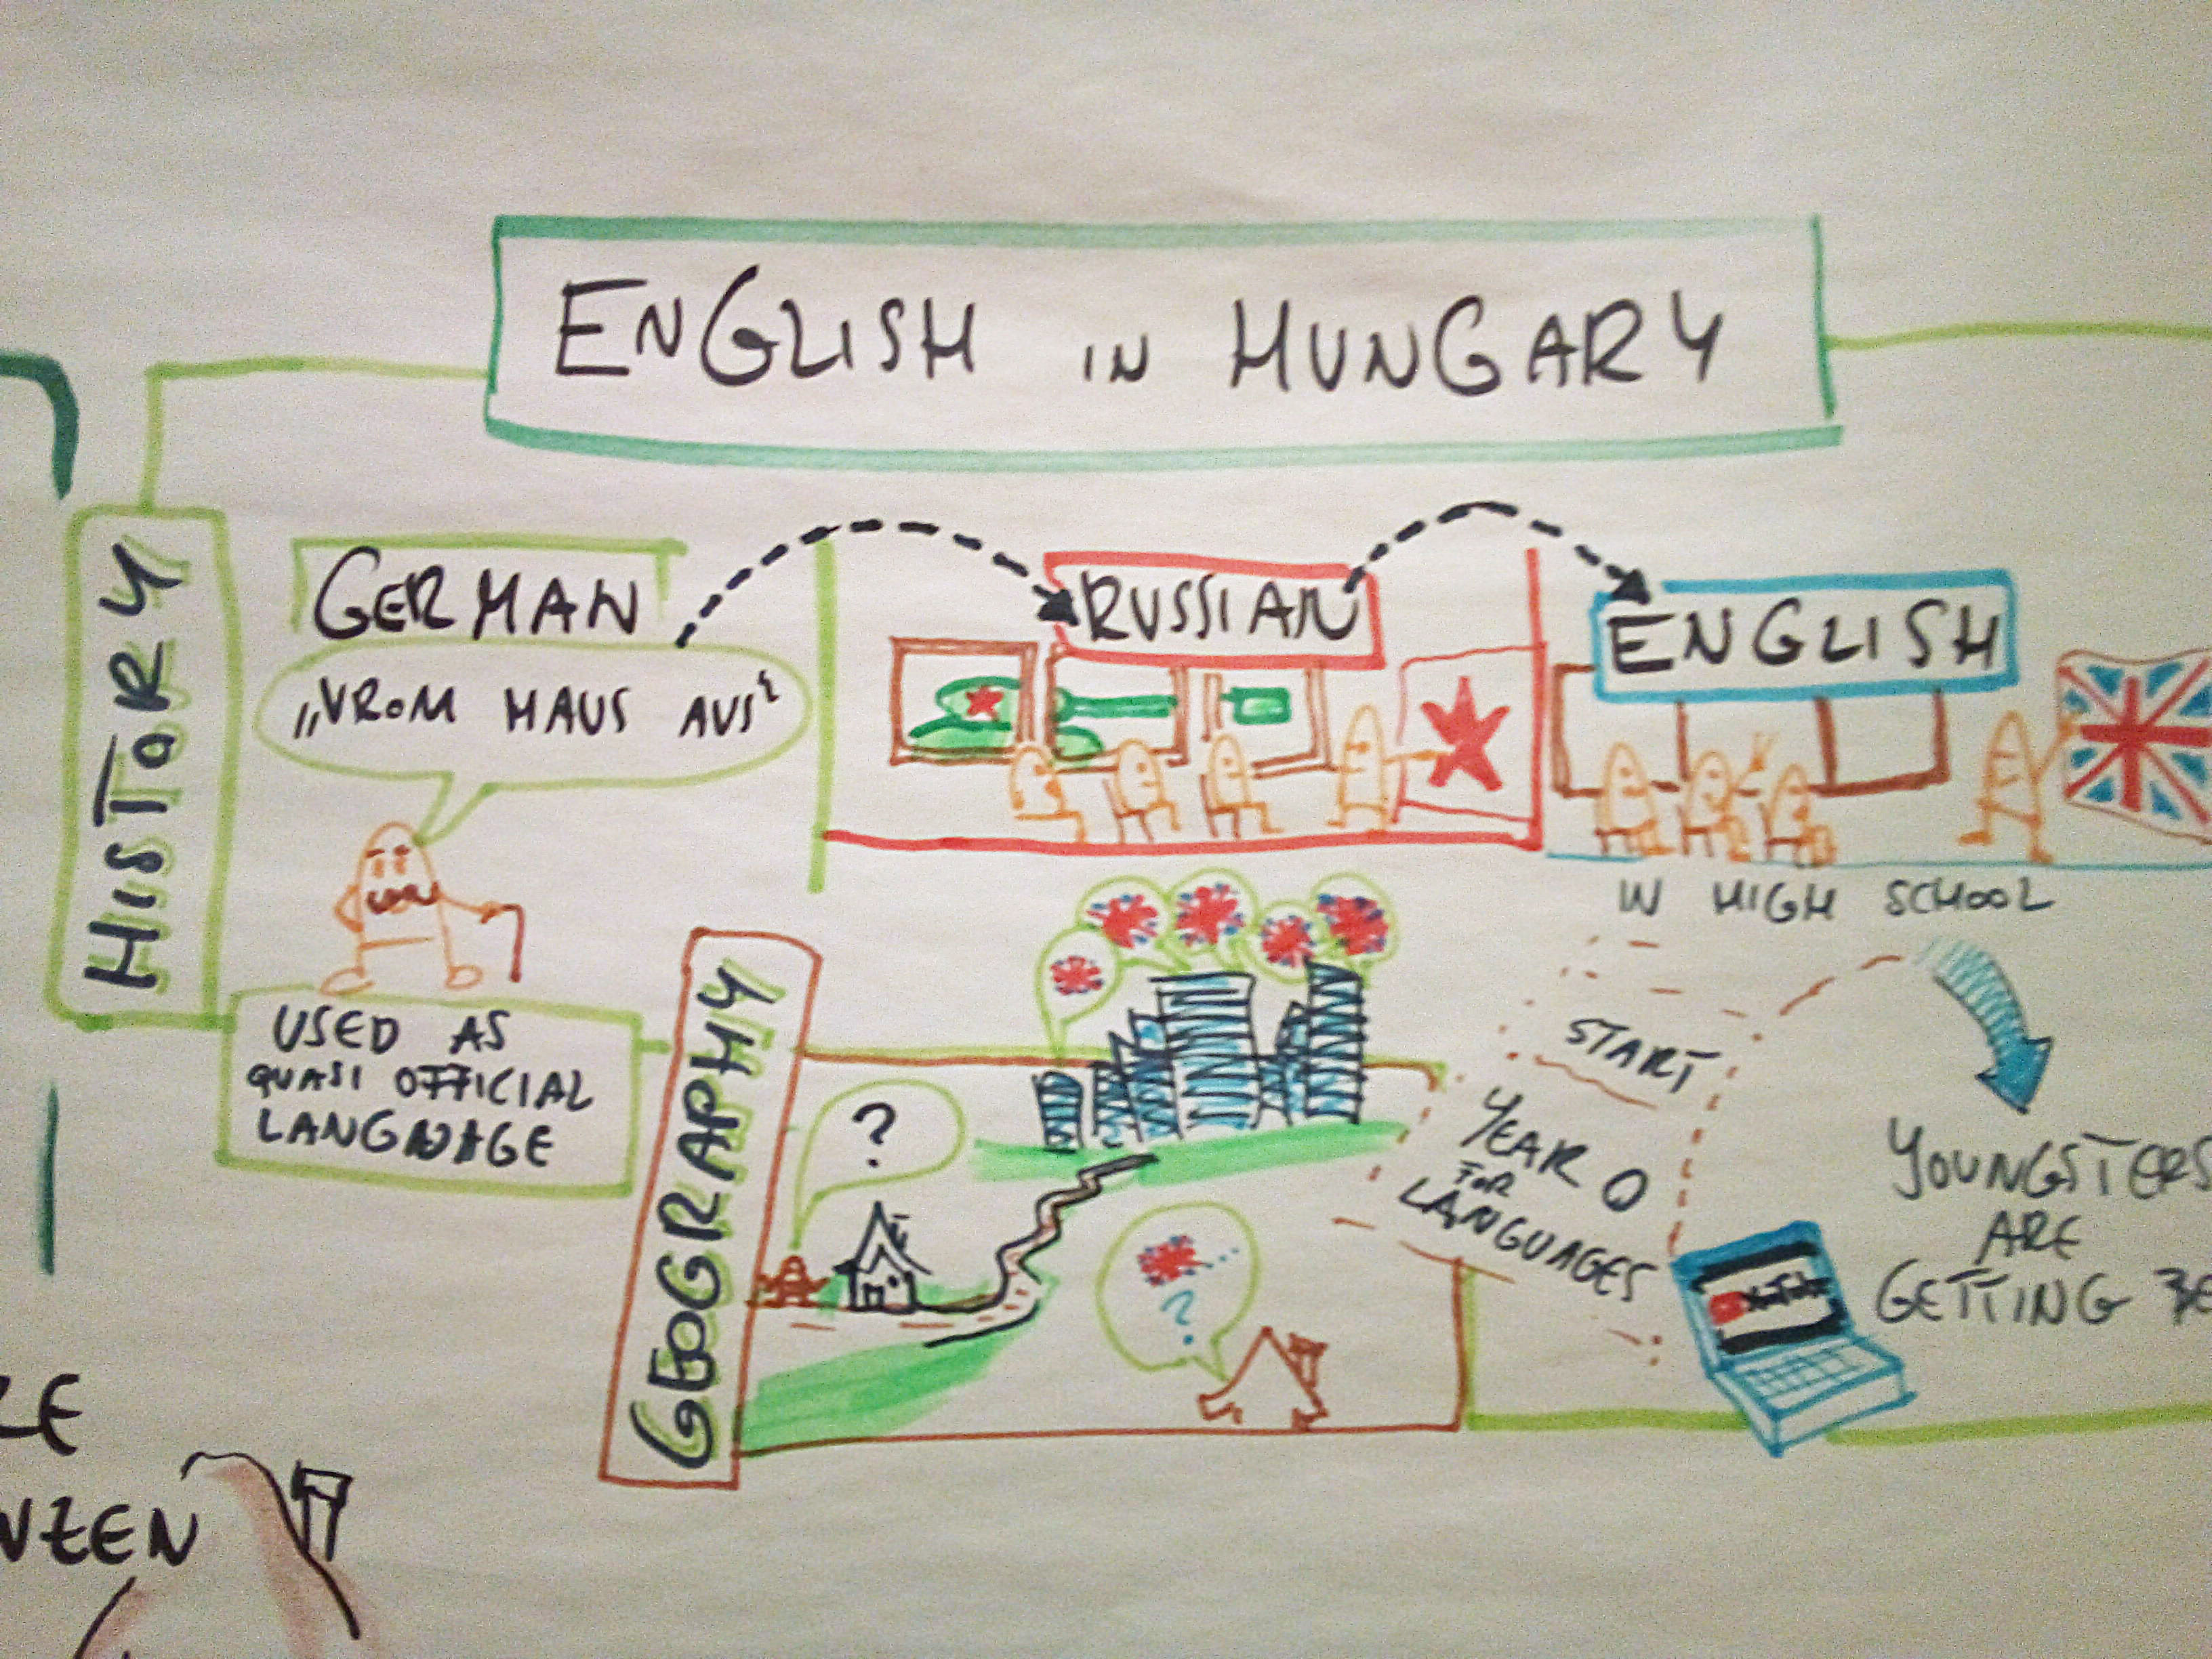 Foreign languages in Hungary